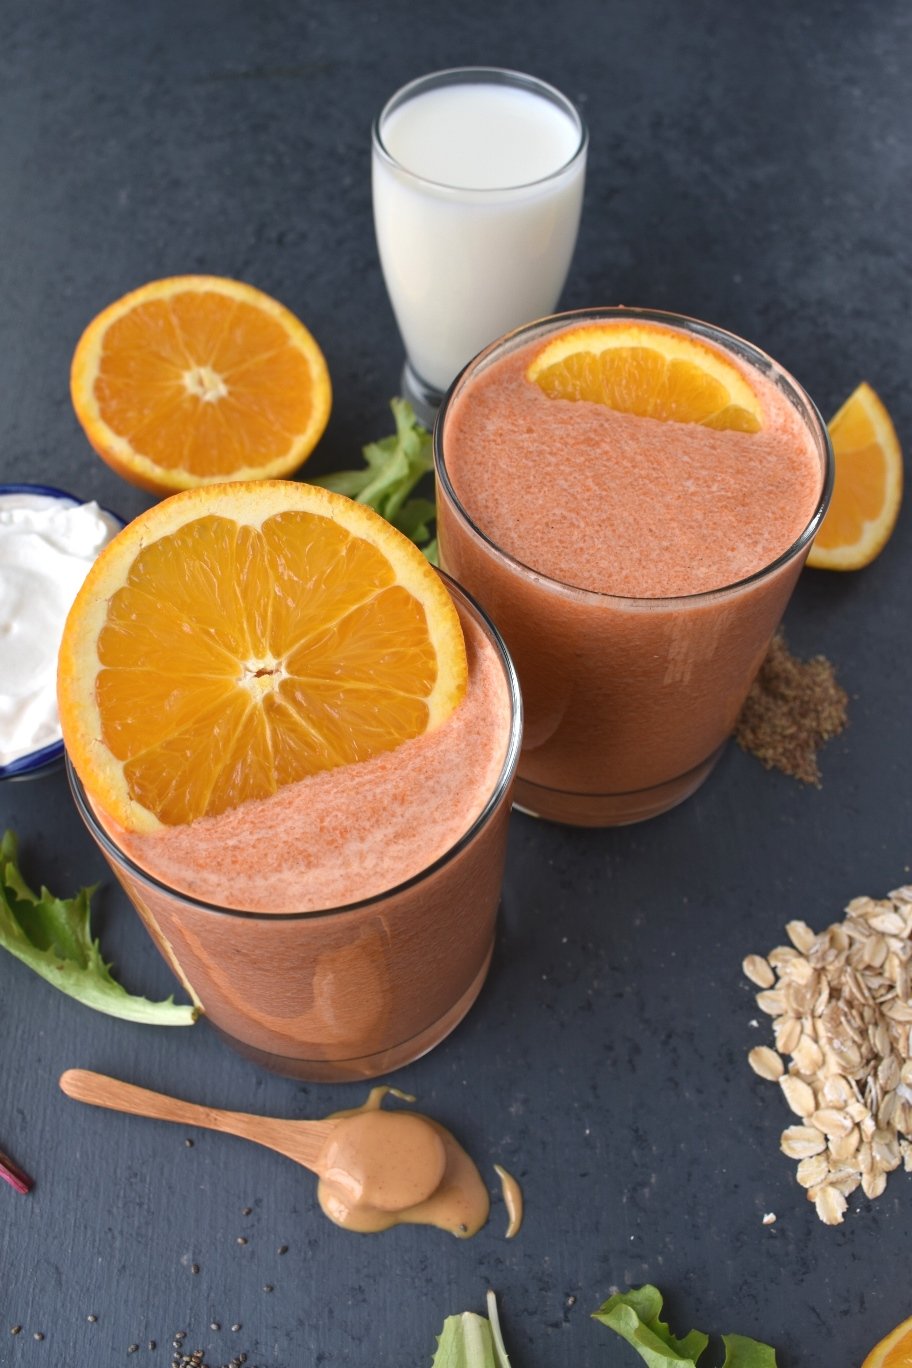 10 Ways to Make a Protein Packed Smoothie Without Protein Powder